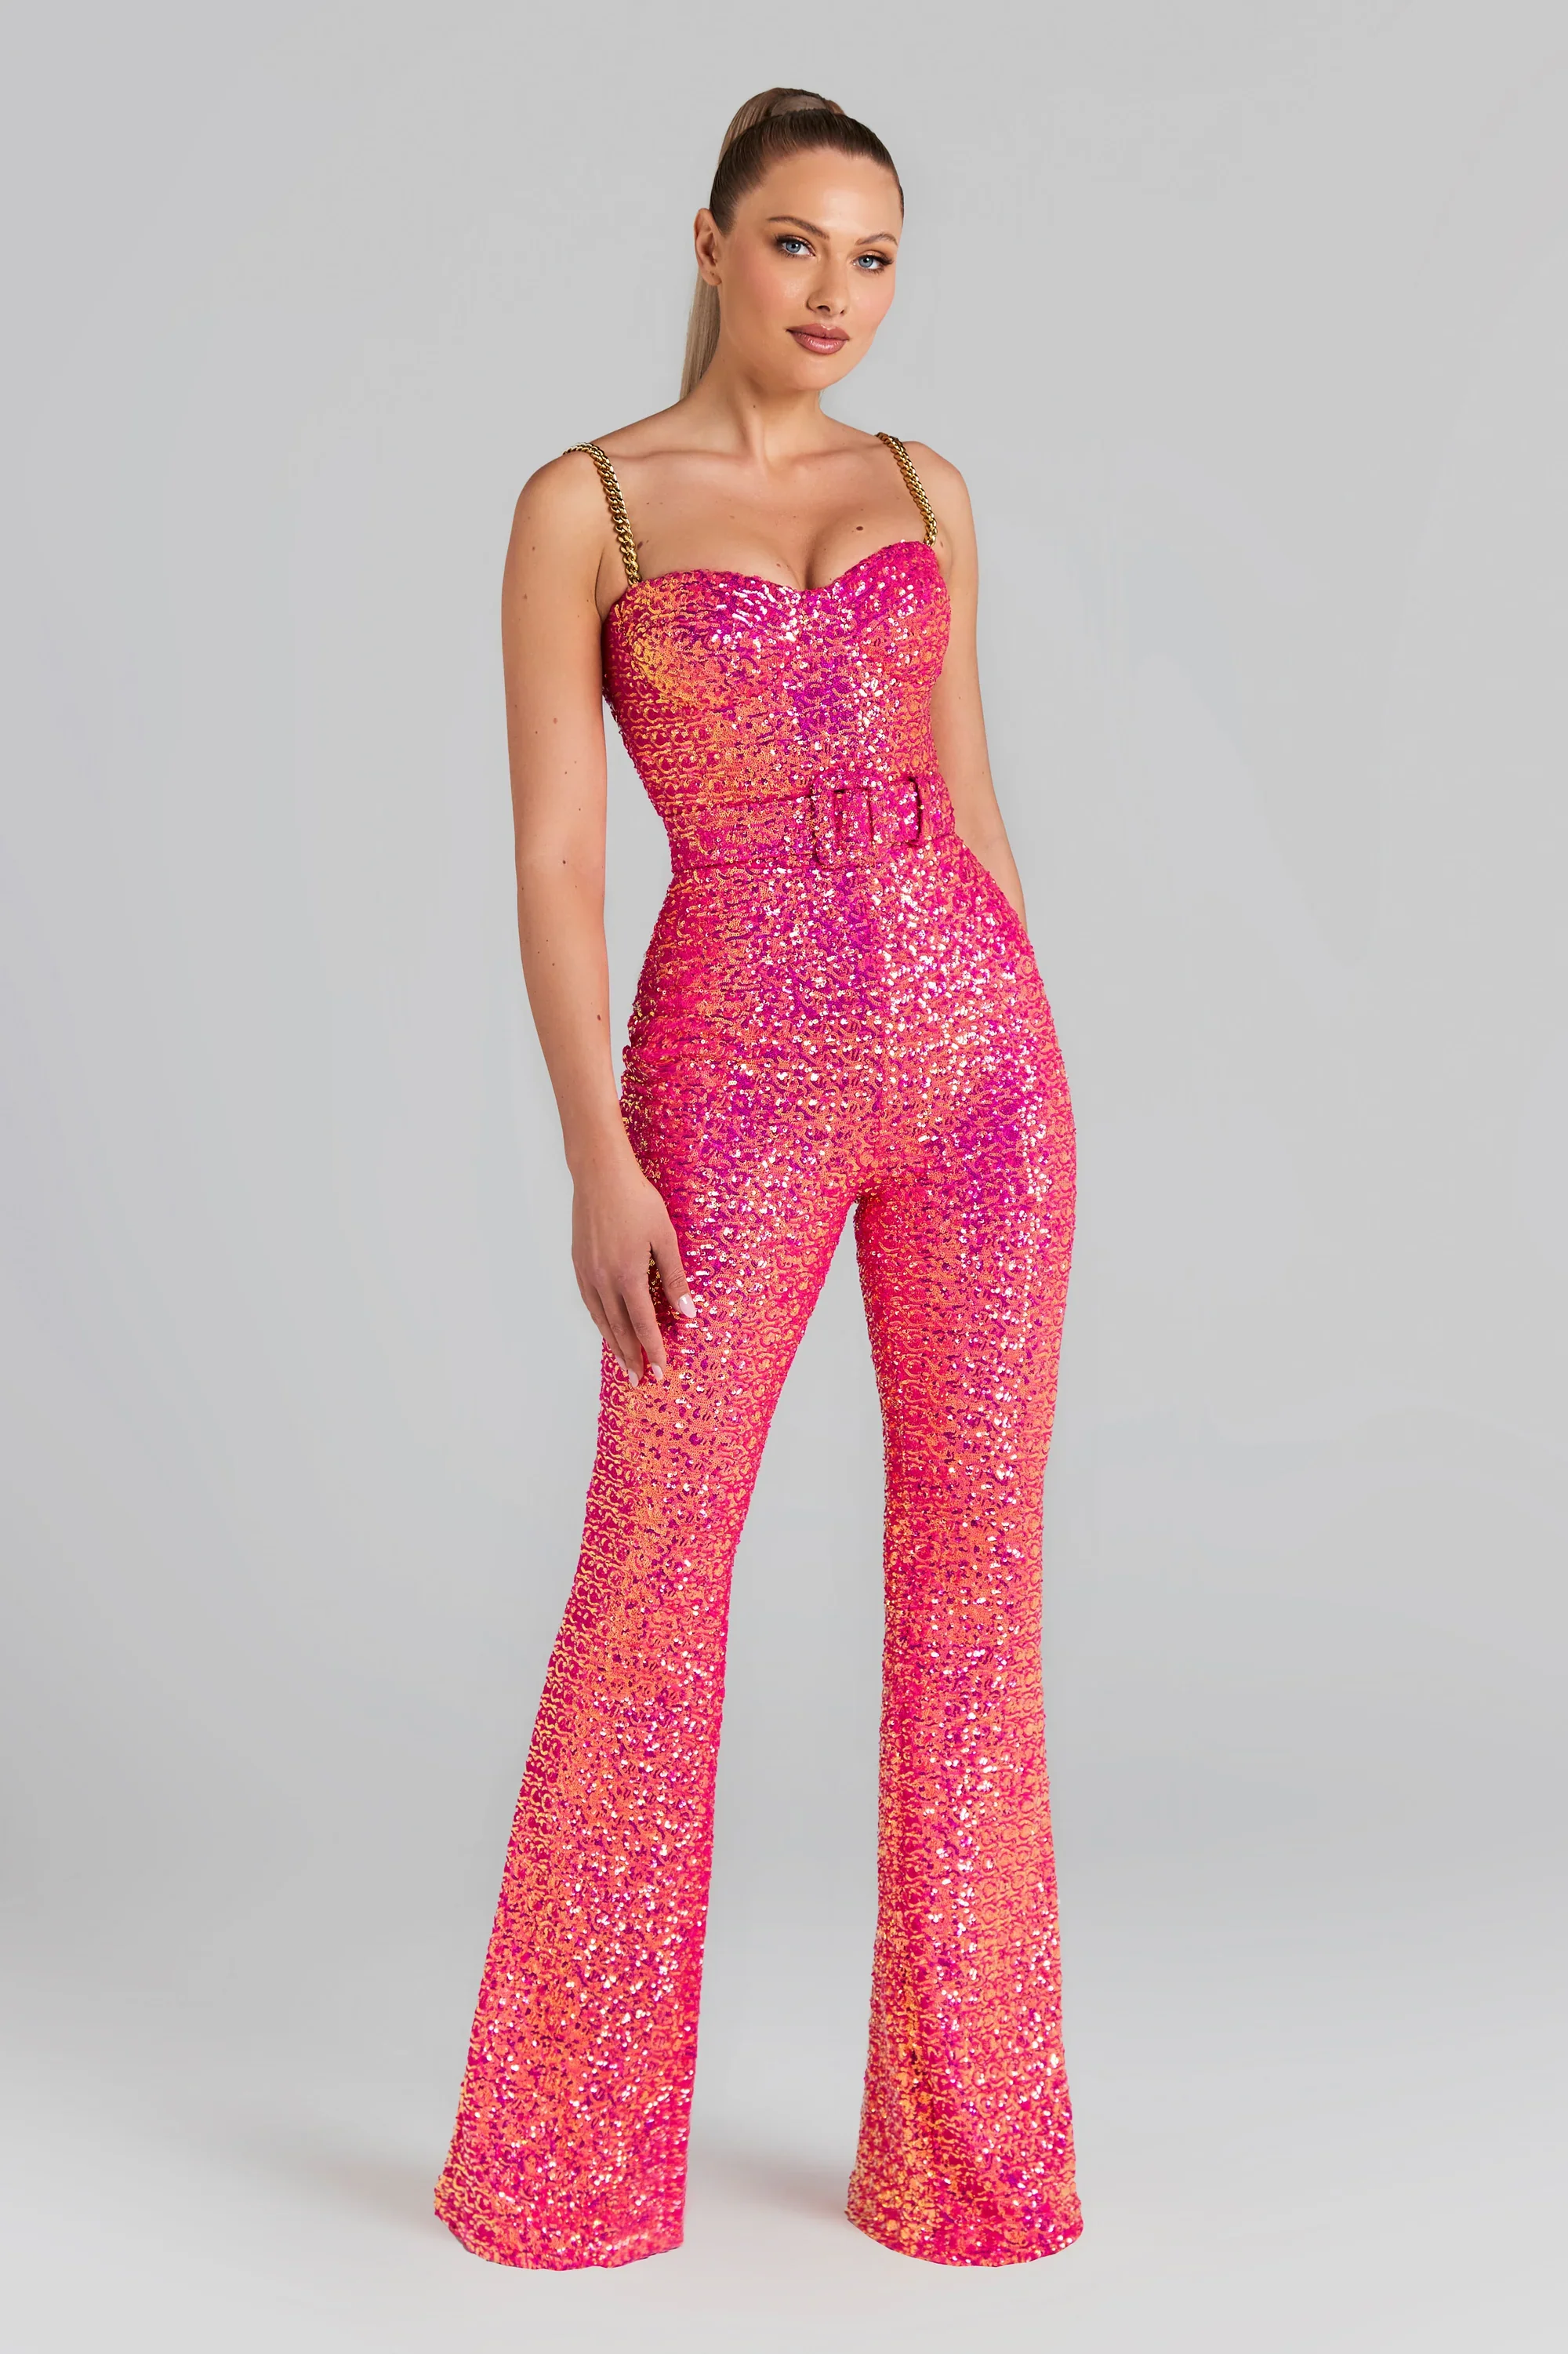 High Quality Pink Shining Sequins Spaghetti Strap Flare Pants Jumpsuit Fashion's Sexy Woman Party Outfit Cocktail Party Vestido